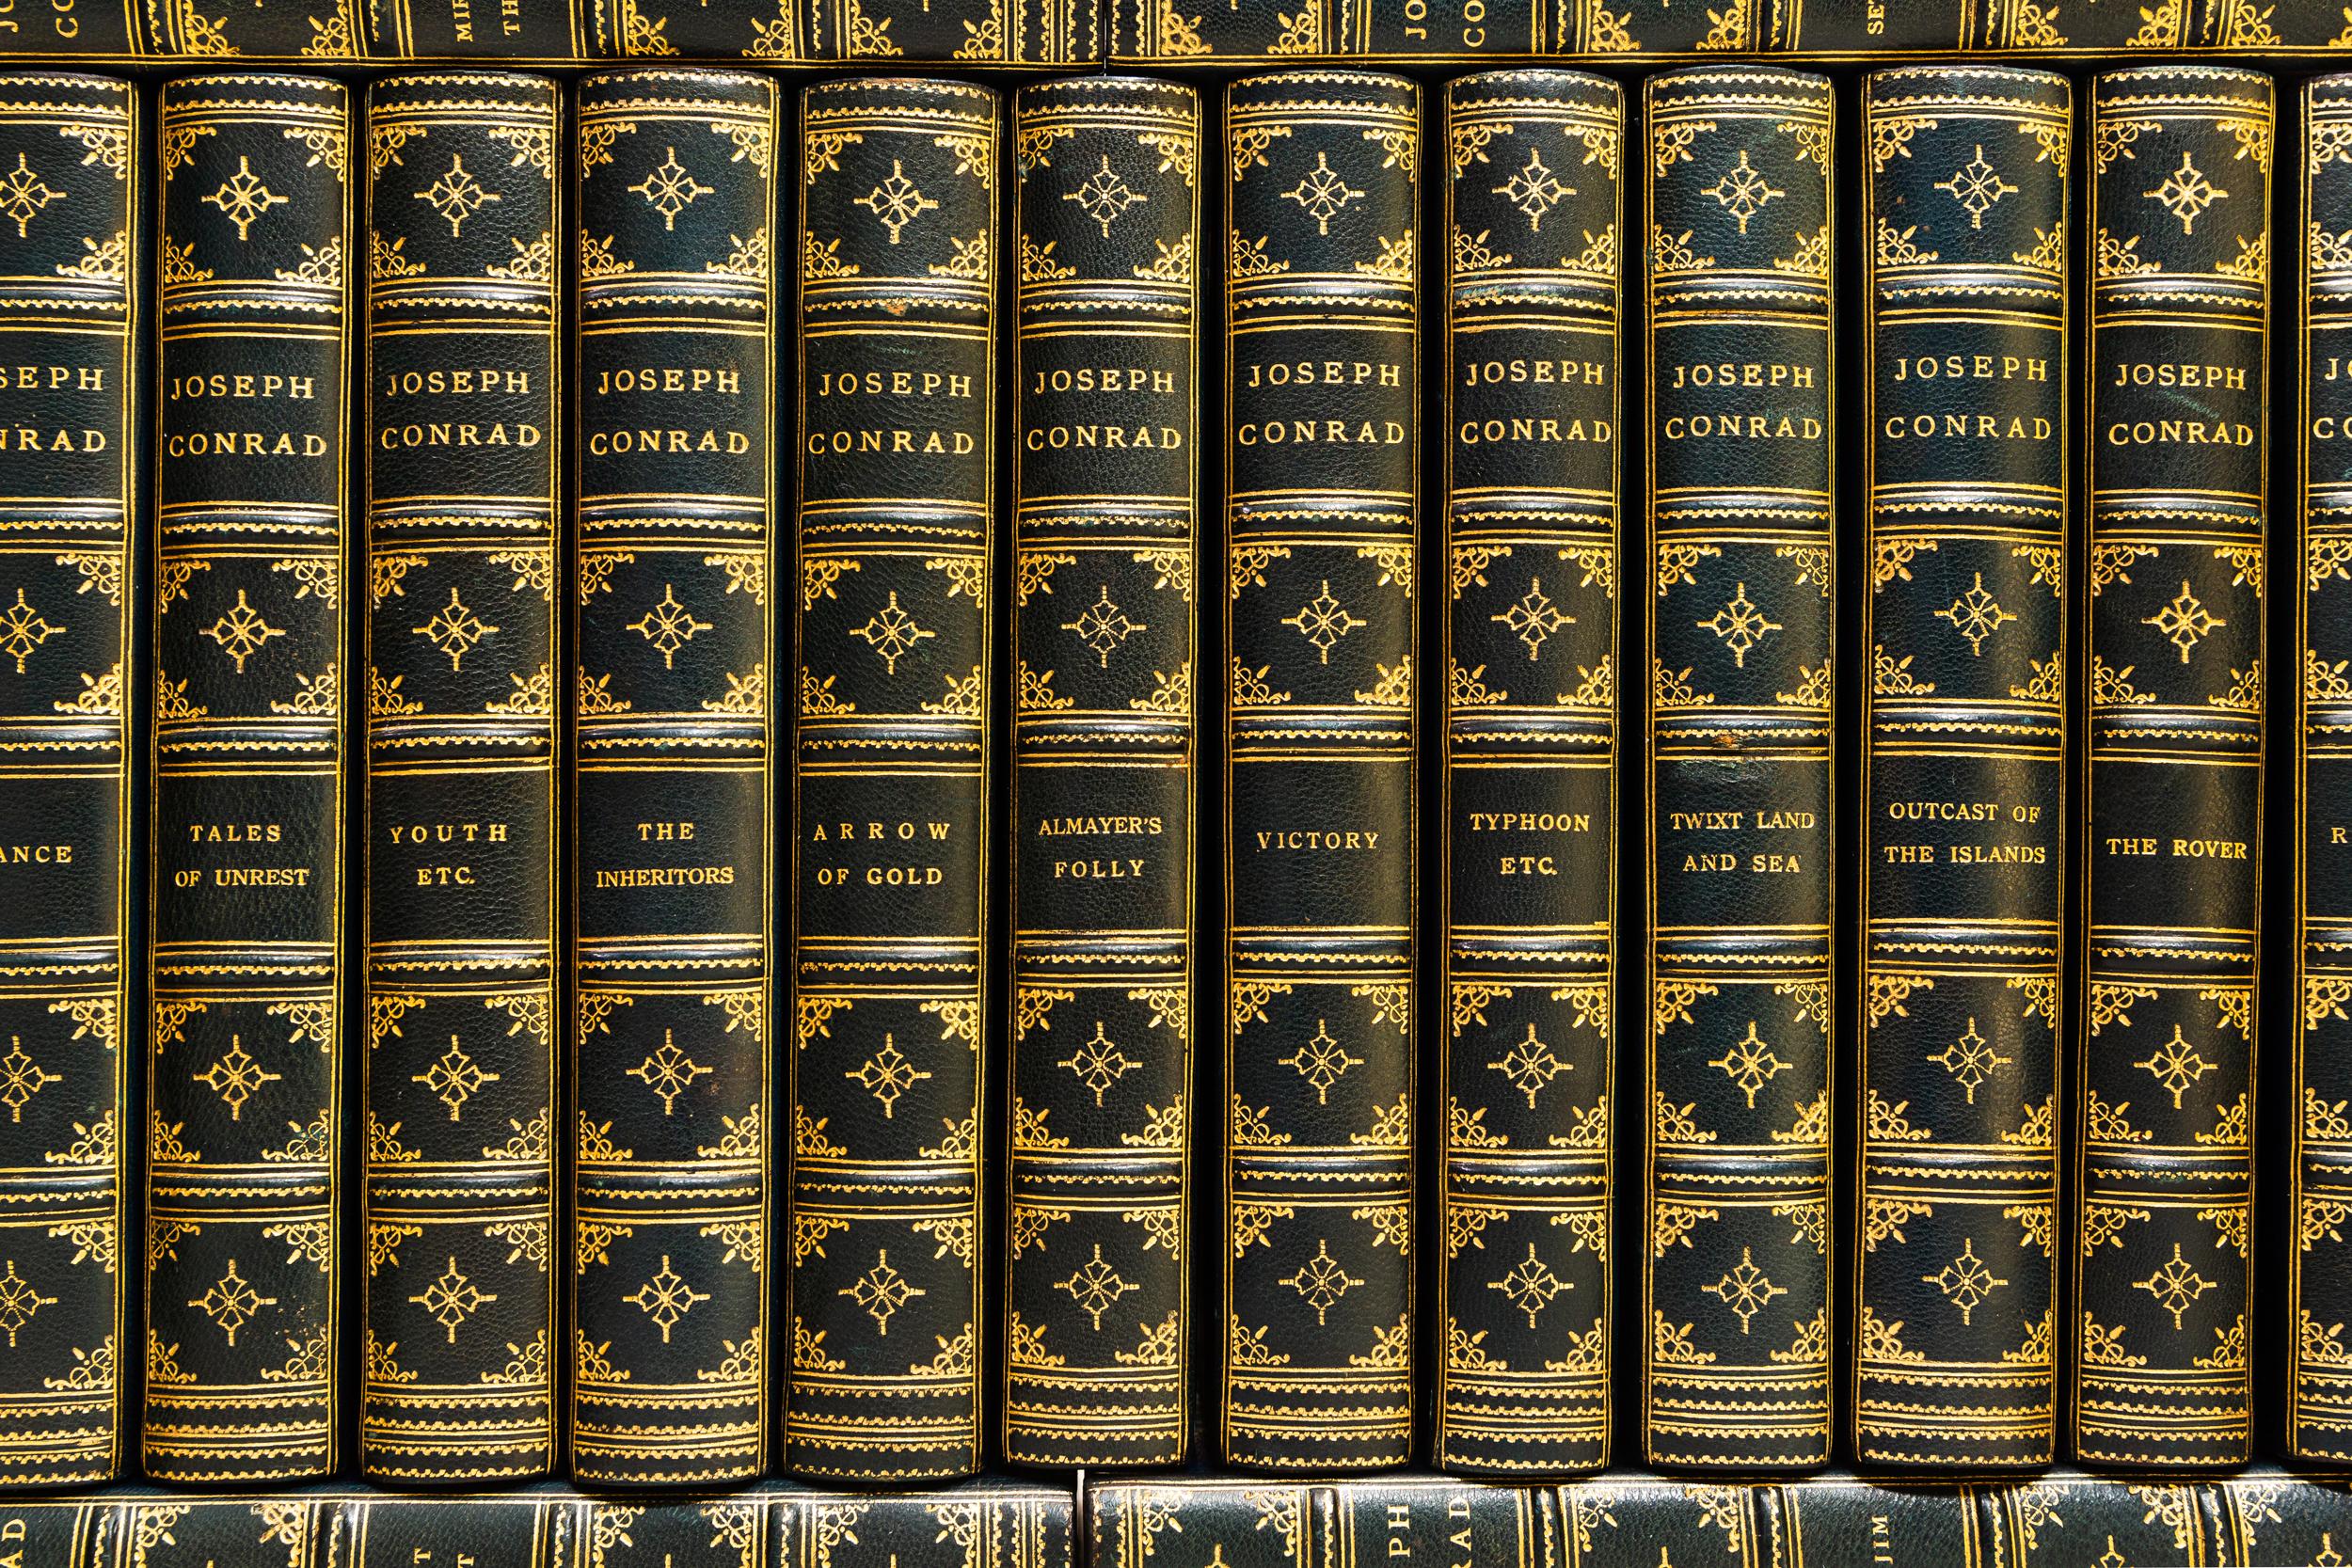 26 Volumes. Joseph Conrad, The Works of Joseph Conrad. Bound in 3/4 blue morocco. Linen boards. Raised bands. Top edges gilt. Decorative gilt emblems on spines. Marbled endpapers. Published: New York 1925.